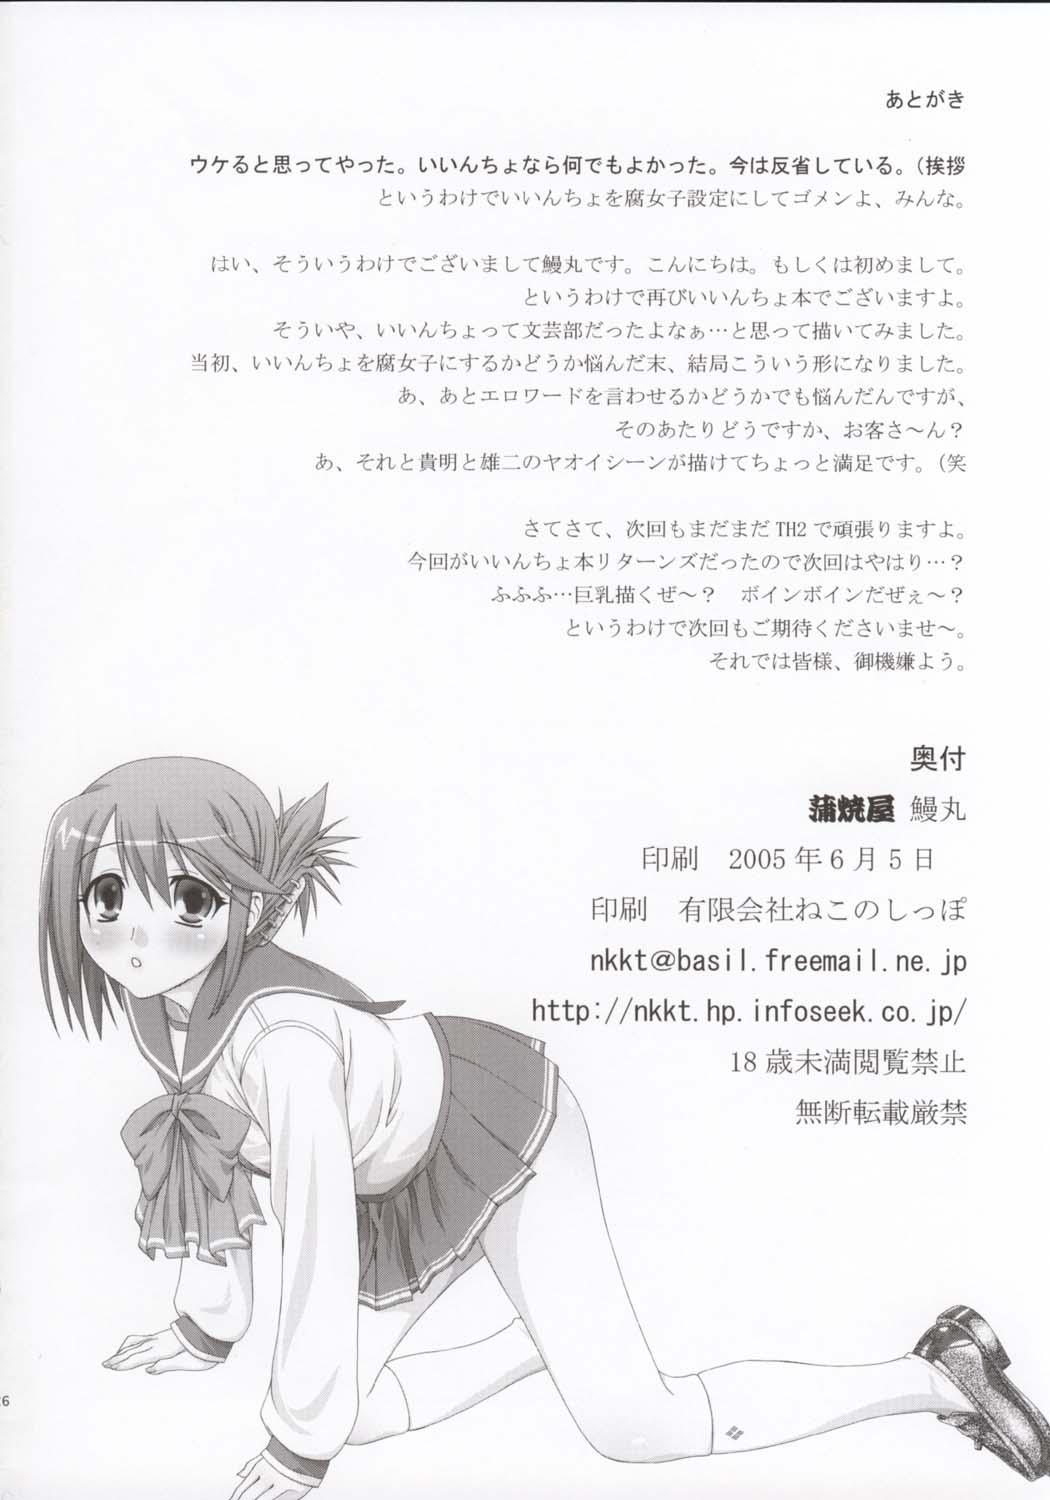 Top Bungei shoujo Literature girl - Toheart2 And - Page 27